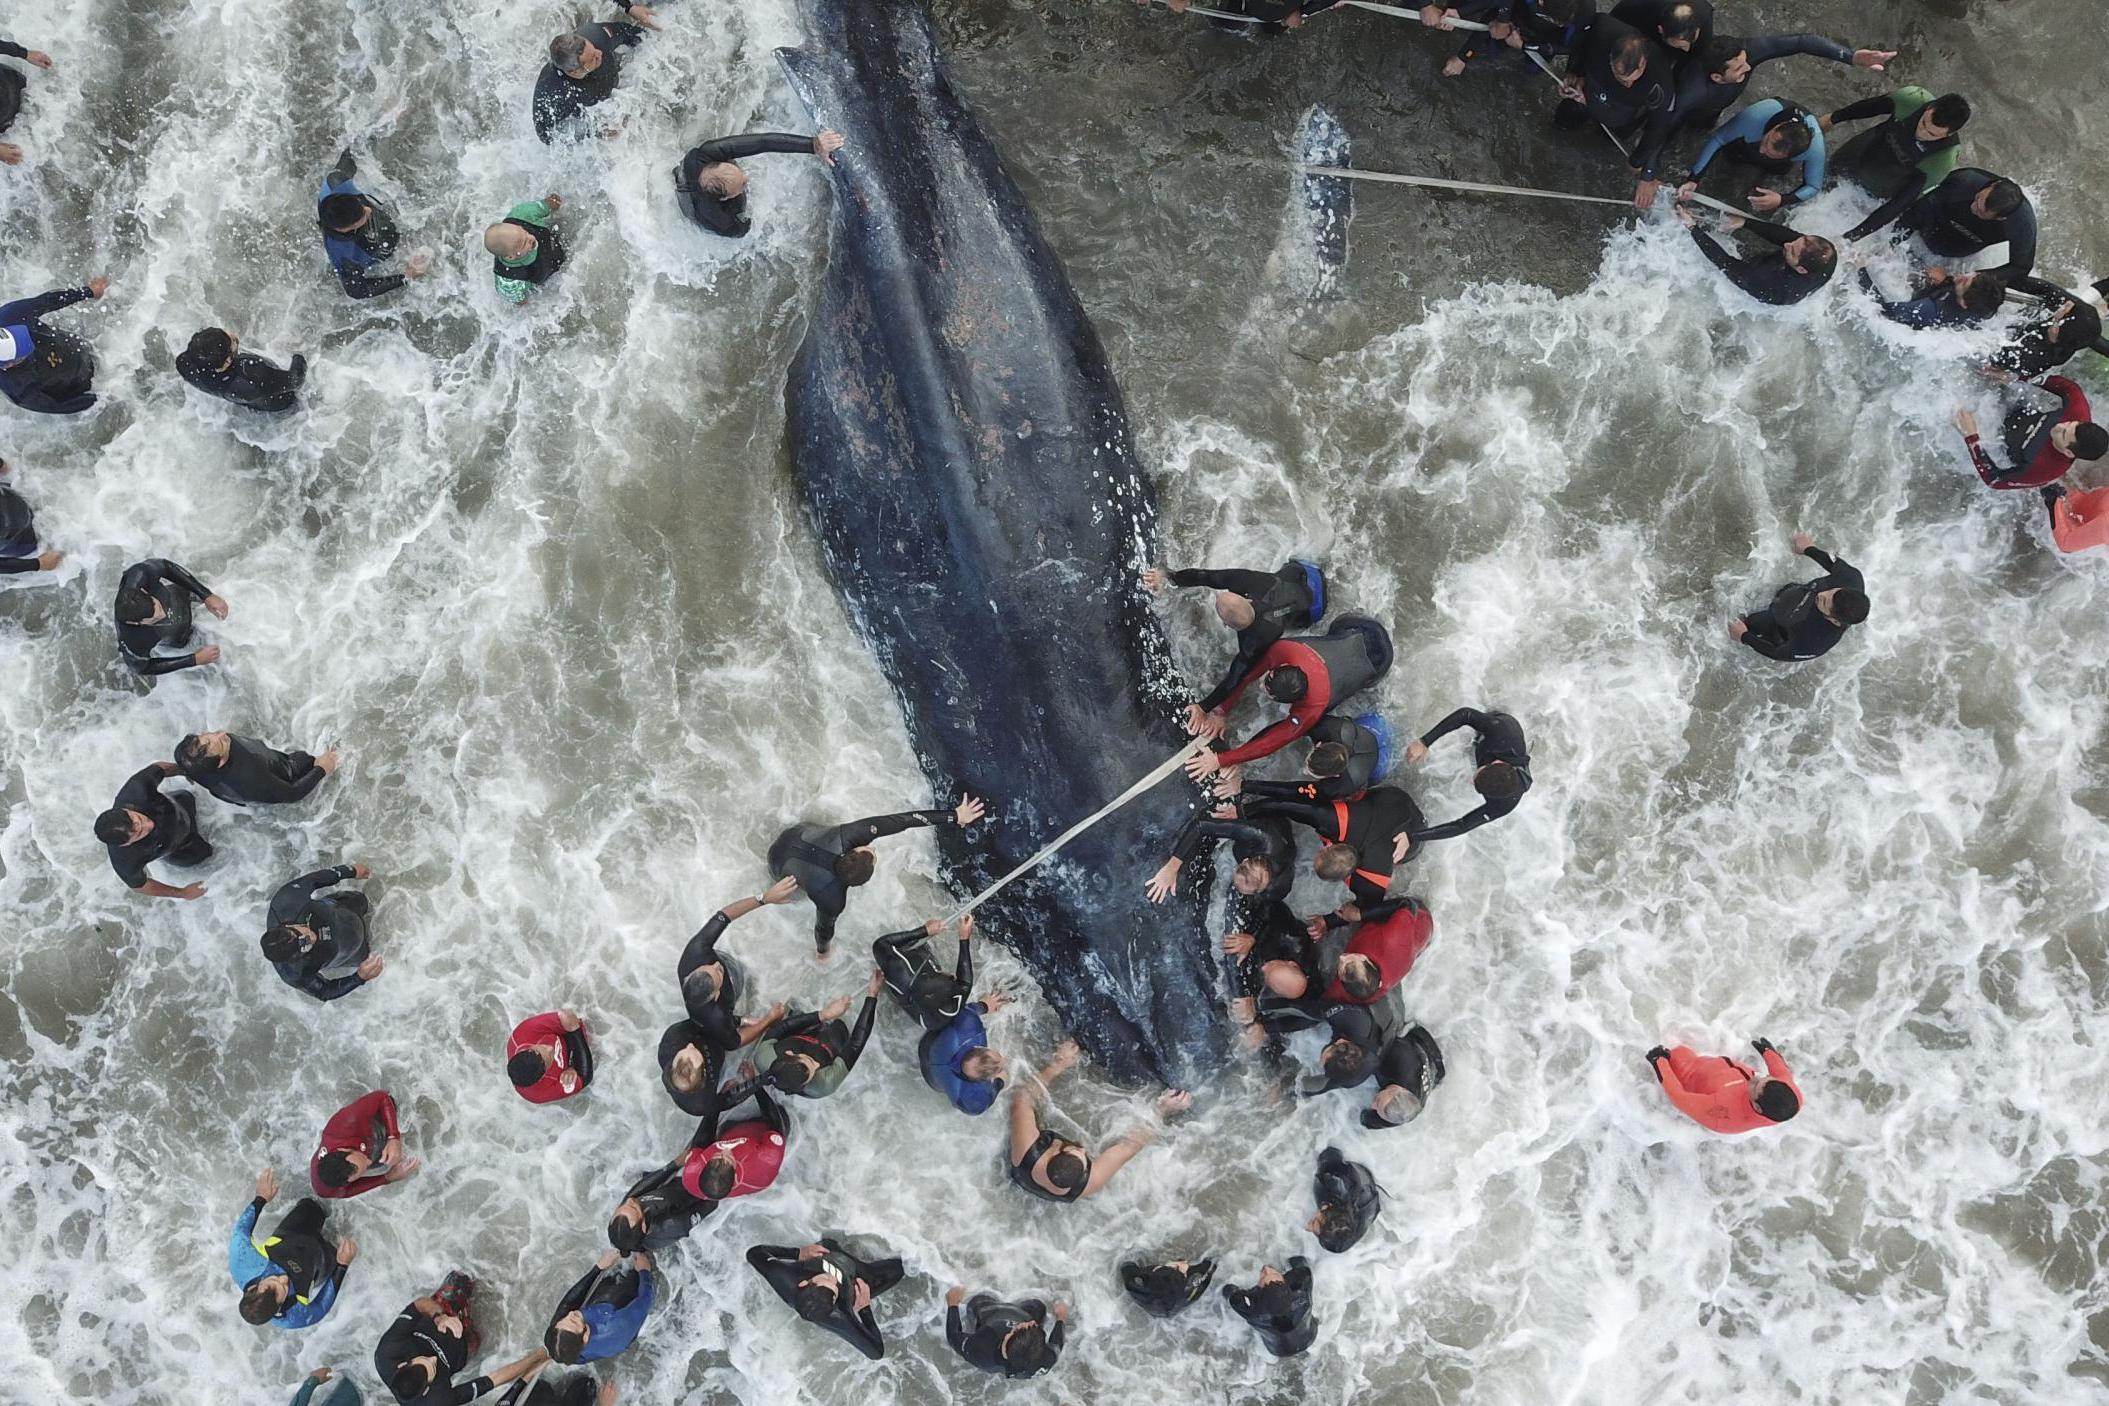 Rescue workers try to save a trapped wale in Argentina (AFP)